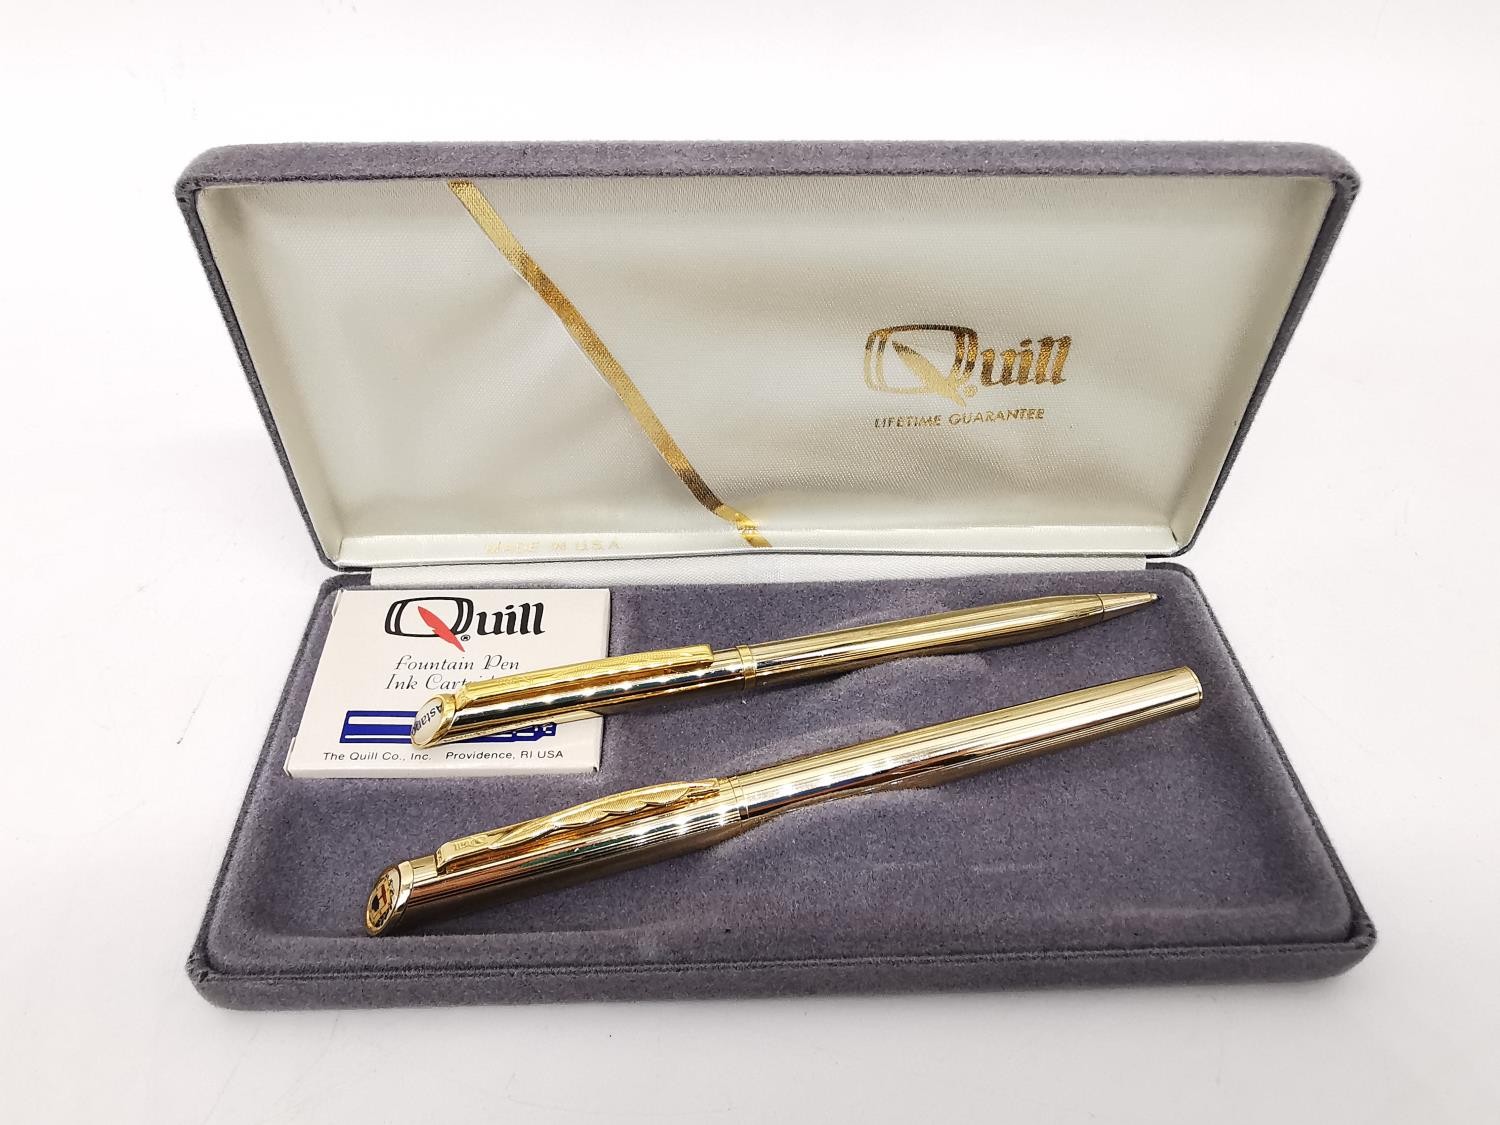 Two cased sets of vintage fountain pens, including a gold plated Schaeffer set with gold plated nibs - Image 9 of 12